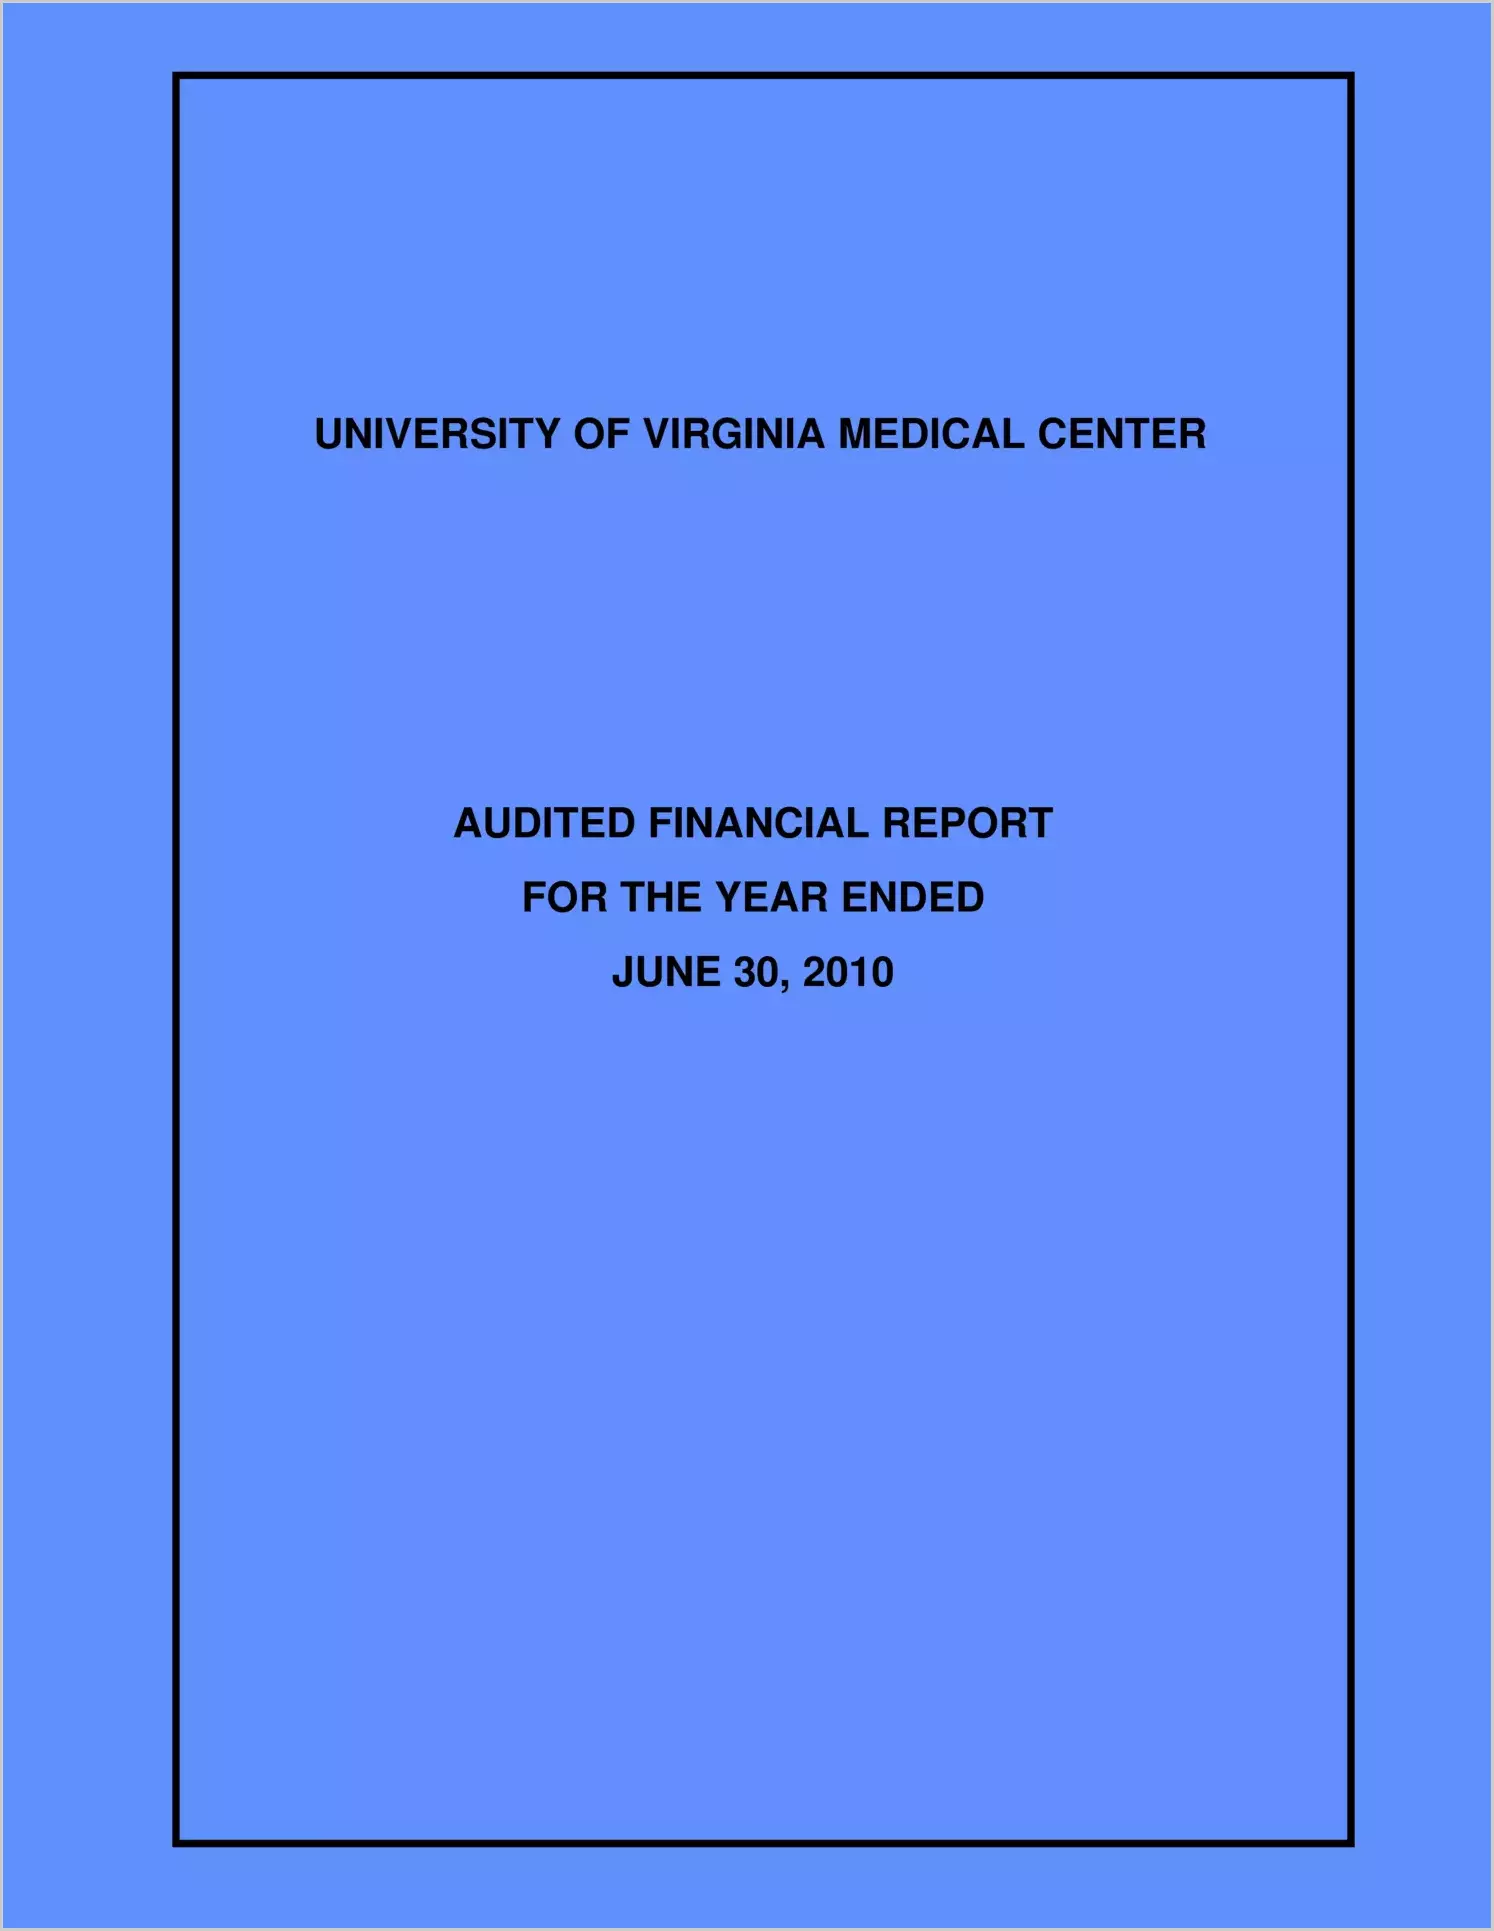 University of Virginia Medical Center Finanical Report for the year ended June 30, 2010